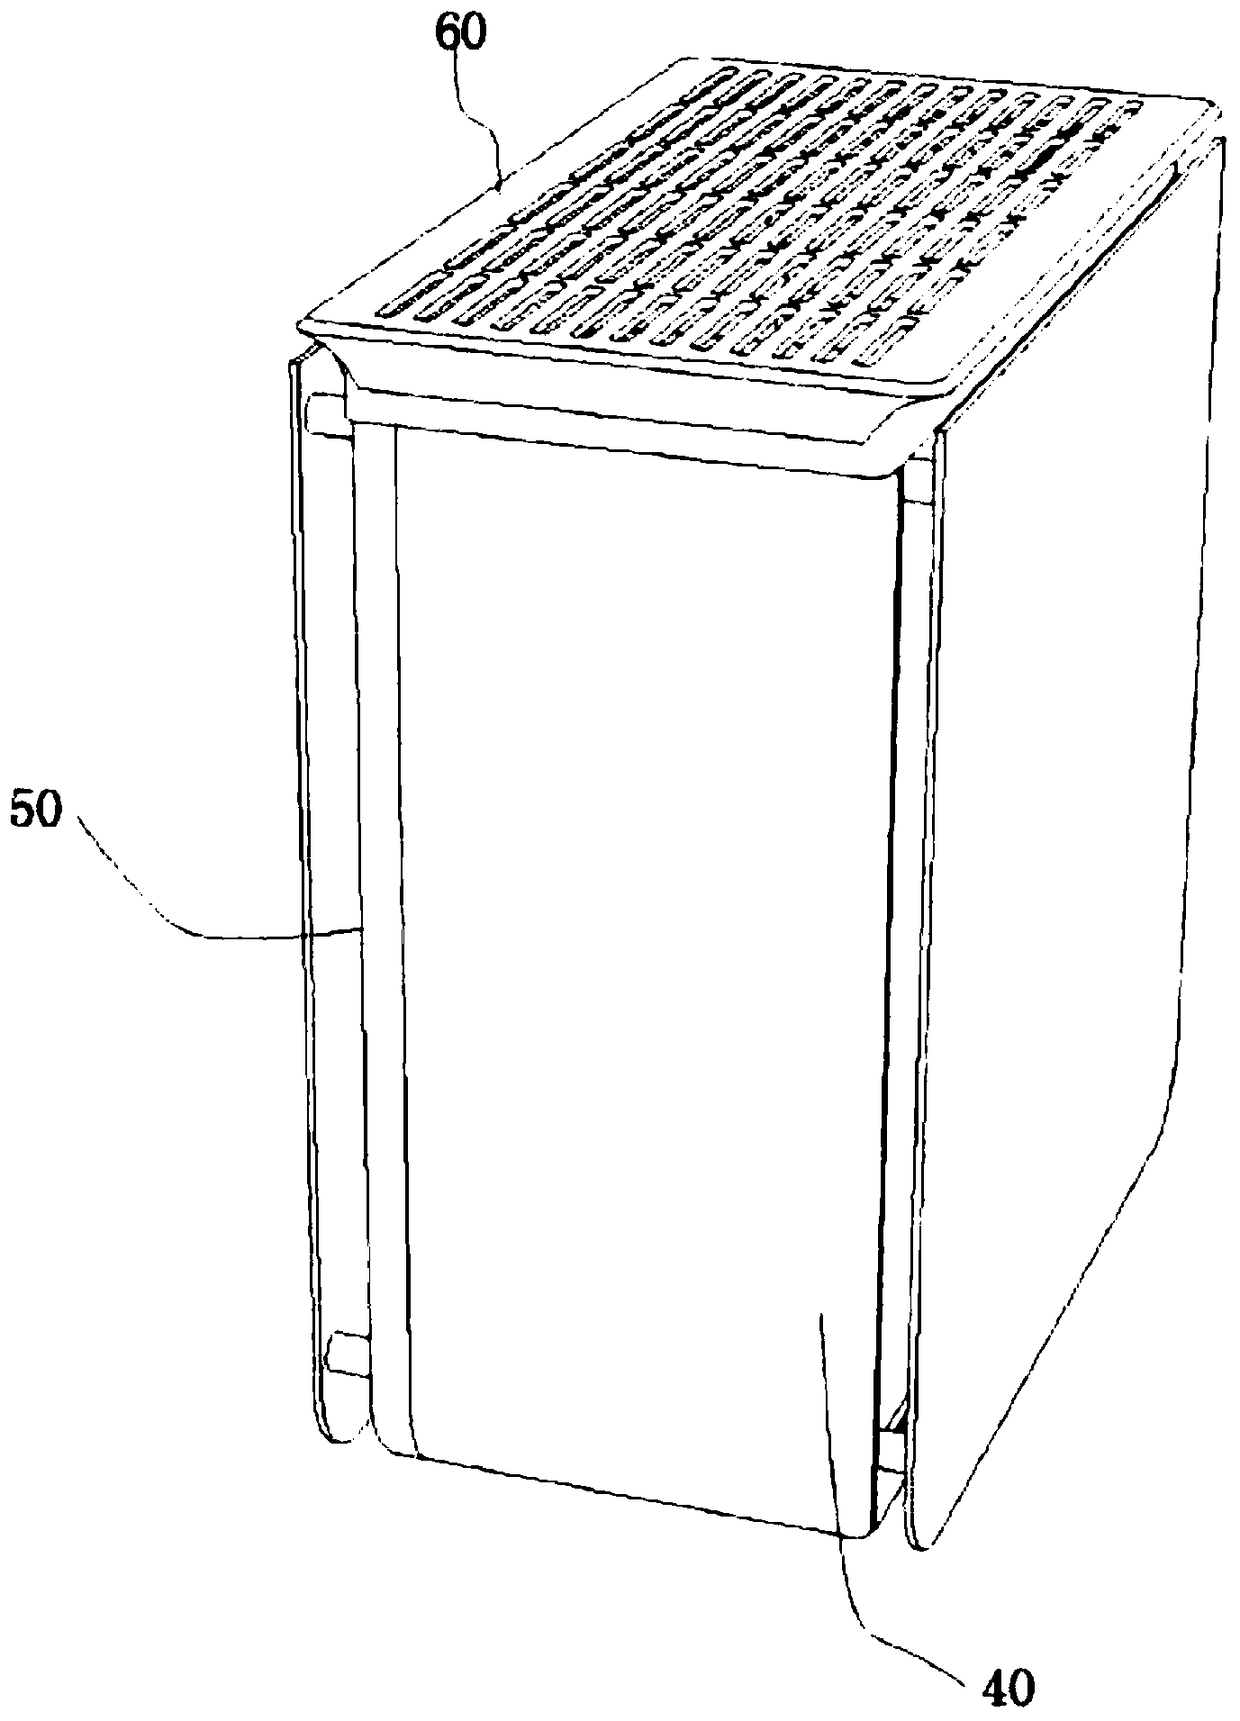 An air purifier with a conical air intake grille